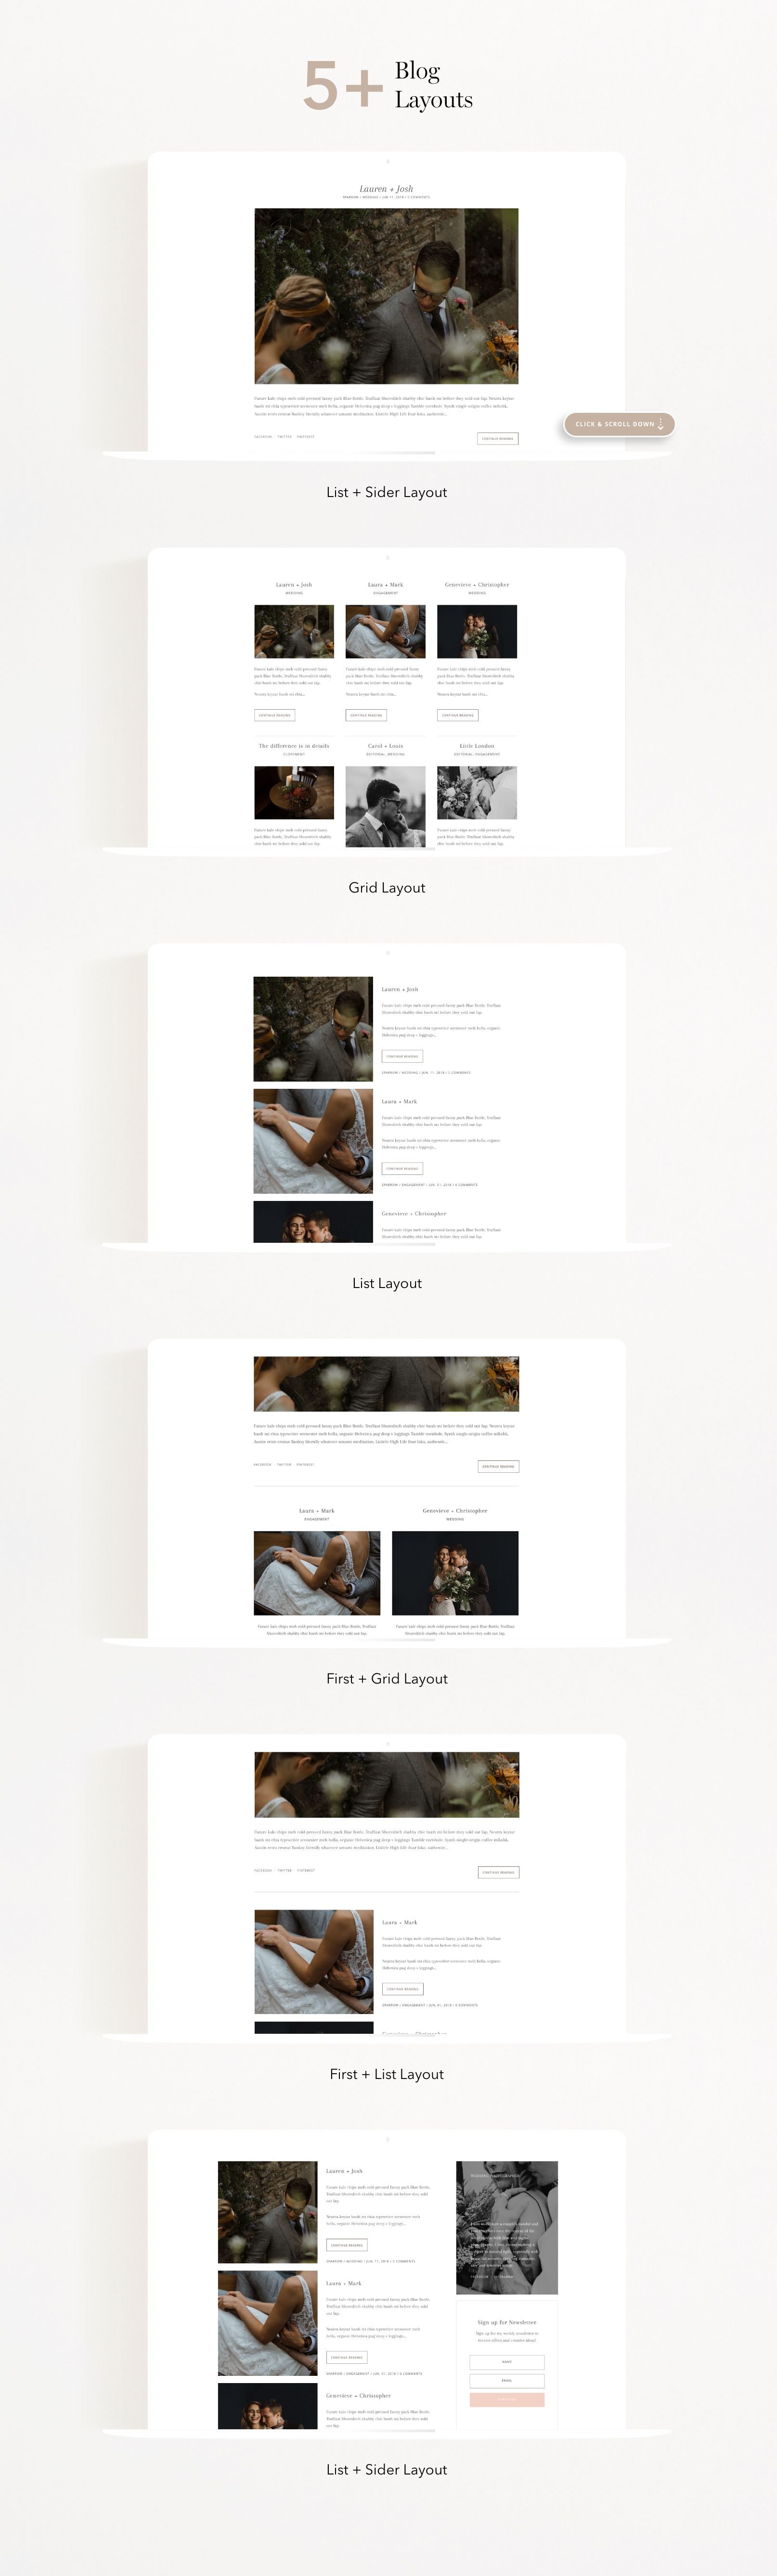 Minimalistic blog layouts collection.